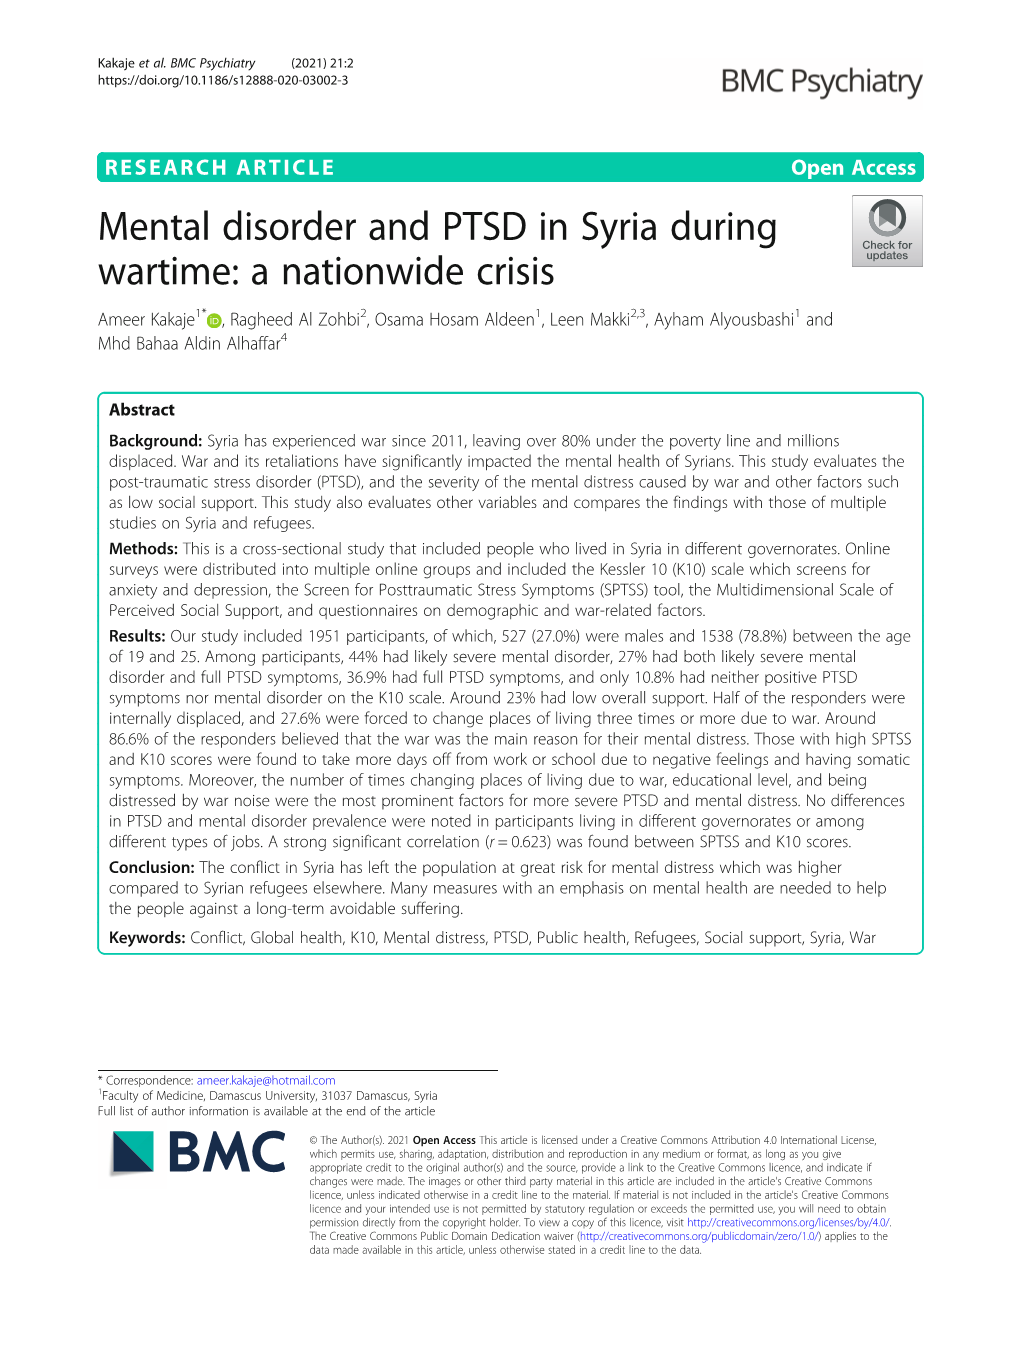 Mental Disorder and PTSD in Syria During Wartime